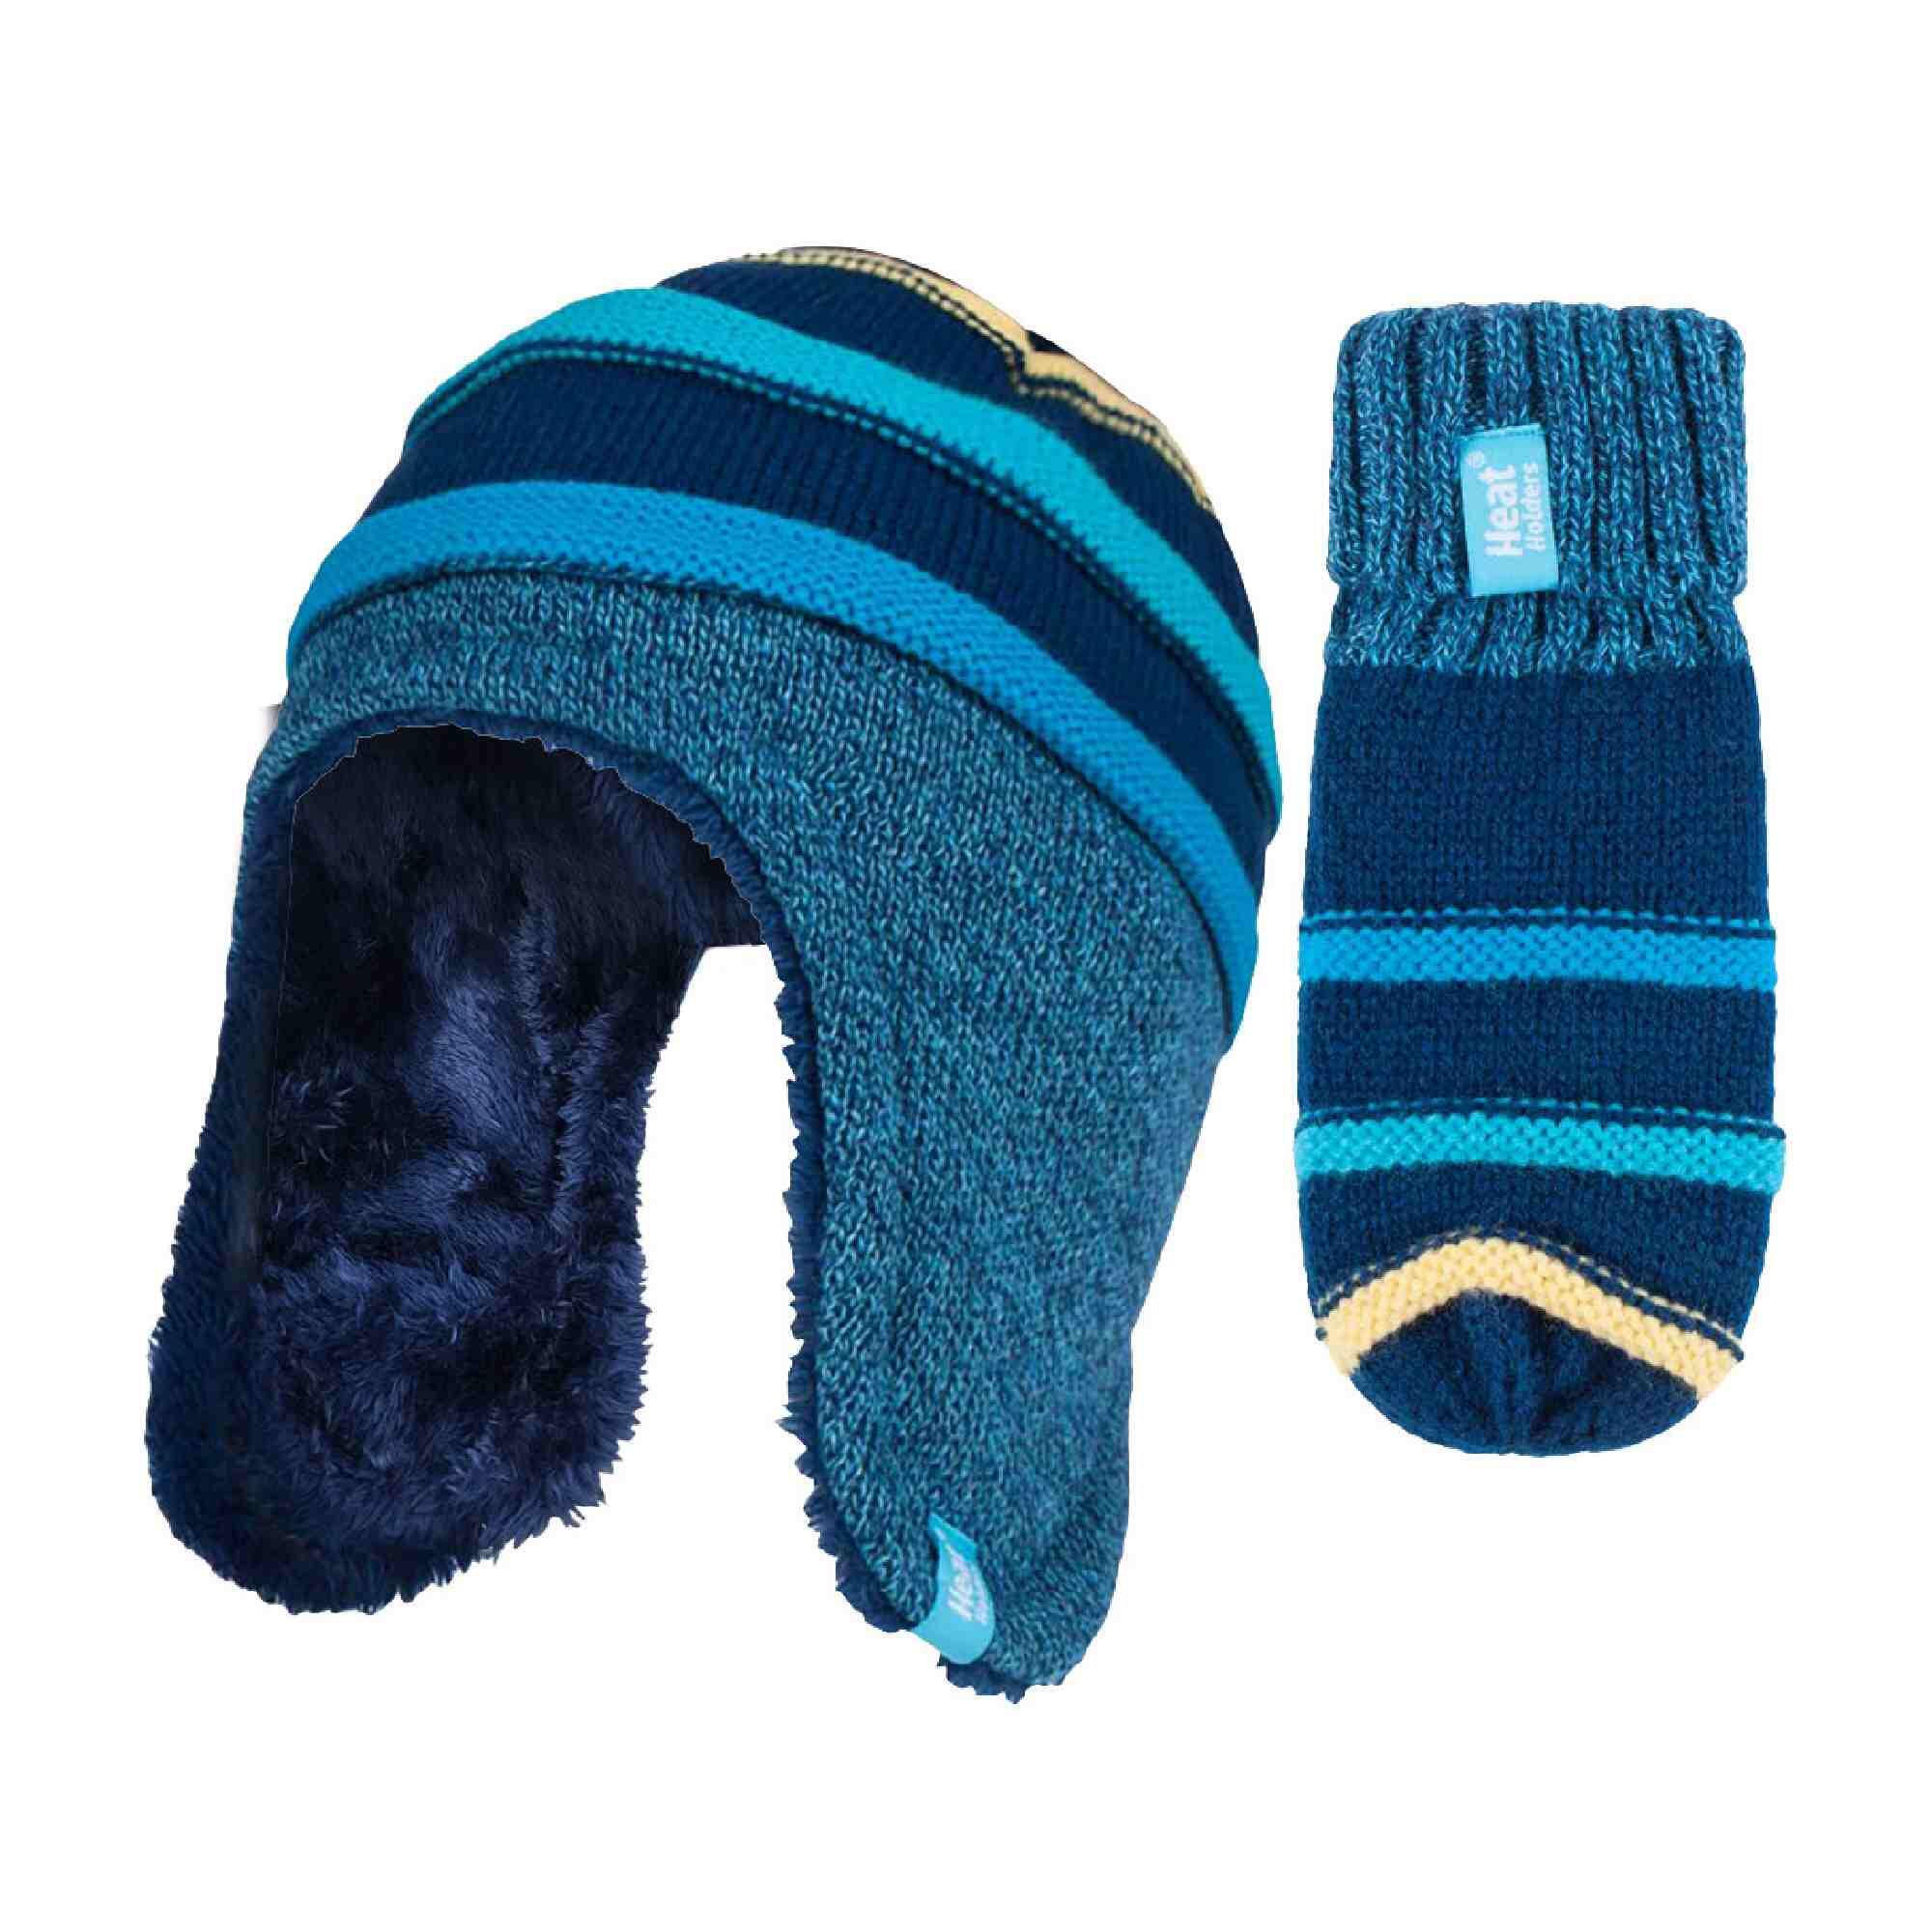 Childrens Winter Warm Fleece Lined Thermal Hat and Mittens Set with Ear Flaps 1/6